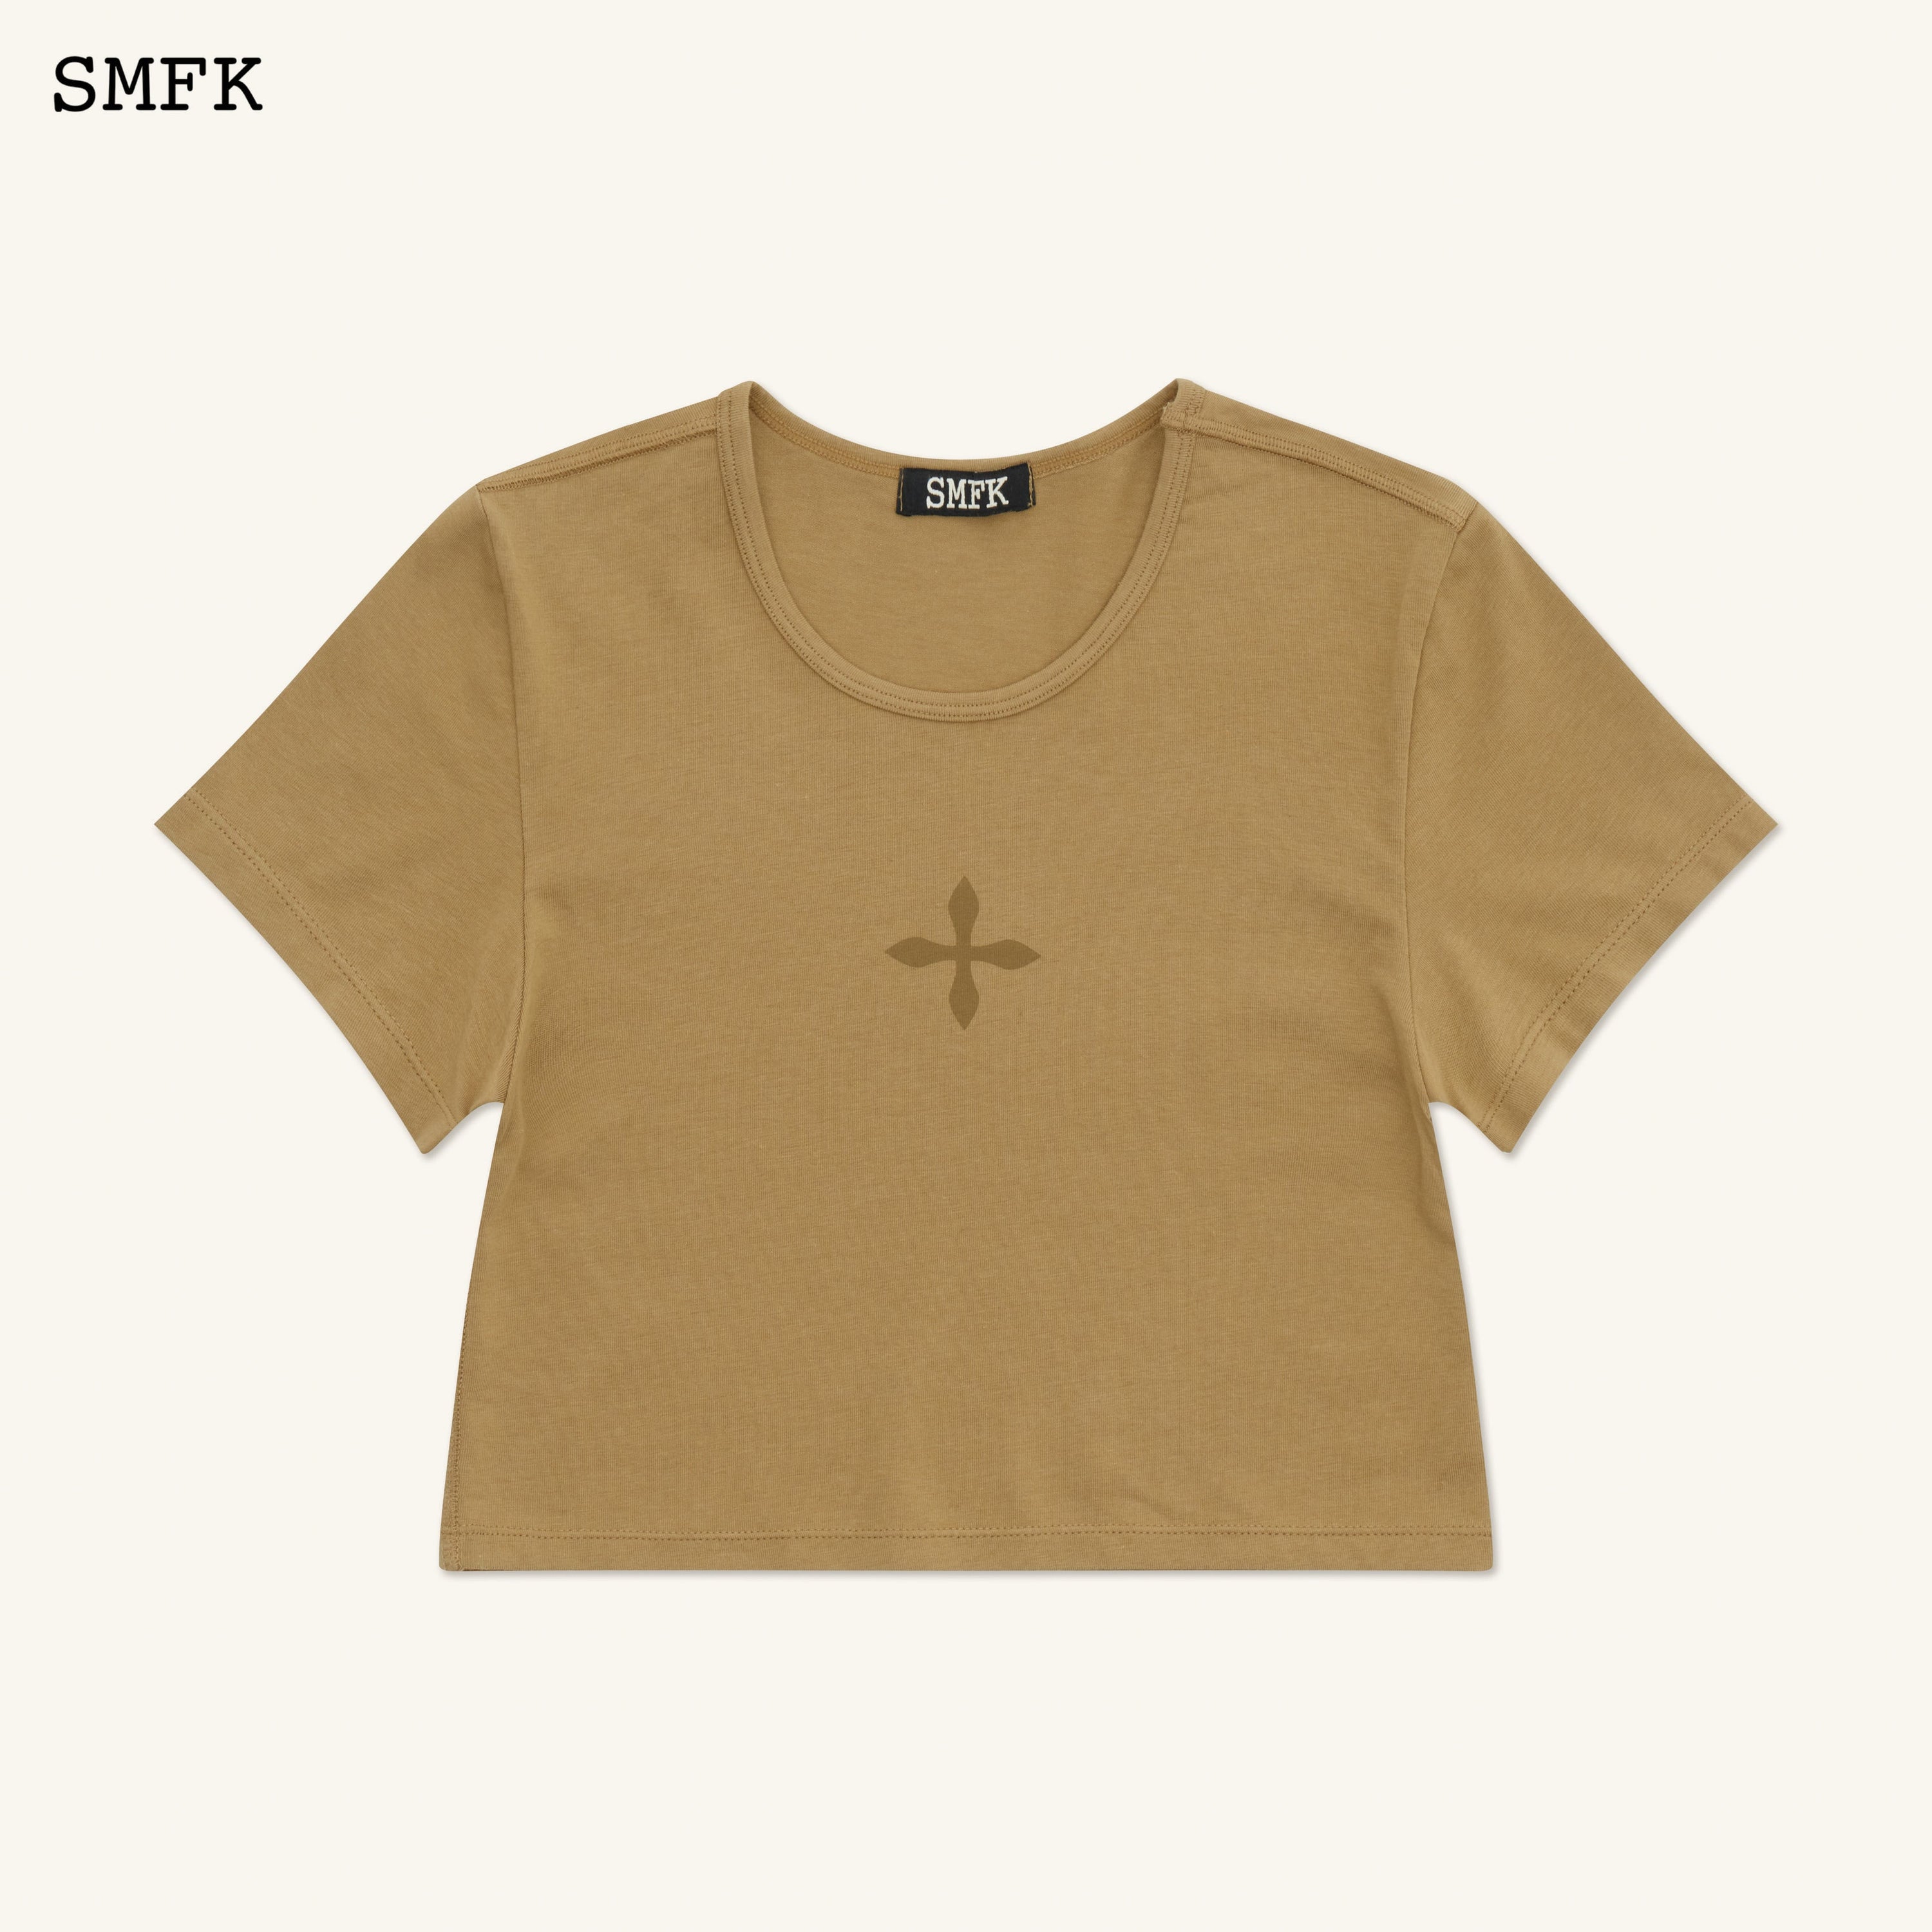 Compass Cross Classic Sporty Tights Tee In Green - SMFK Official